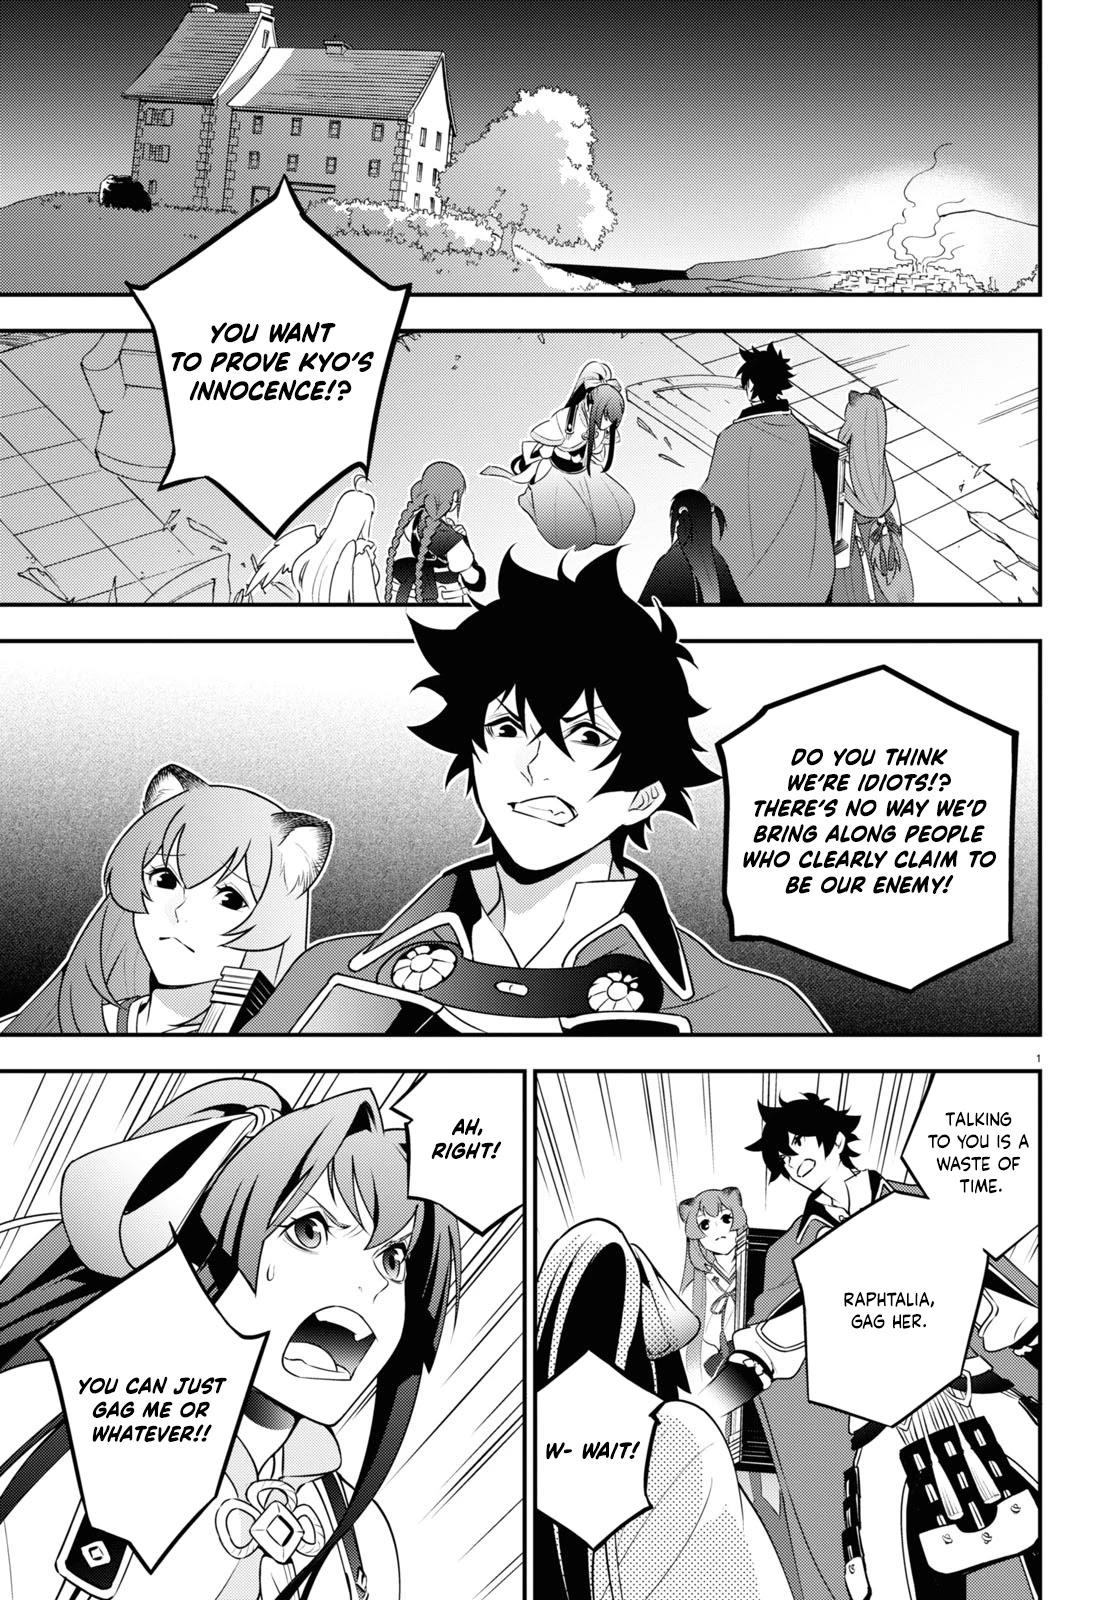 The Rising Of The Shield Hero - Chapter 79 - Conditional Companionship -  MangaToo